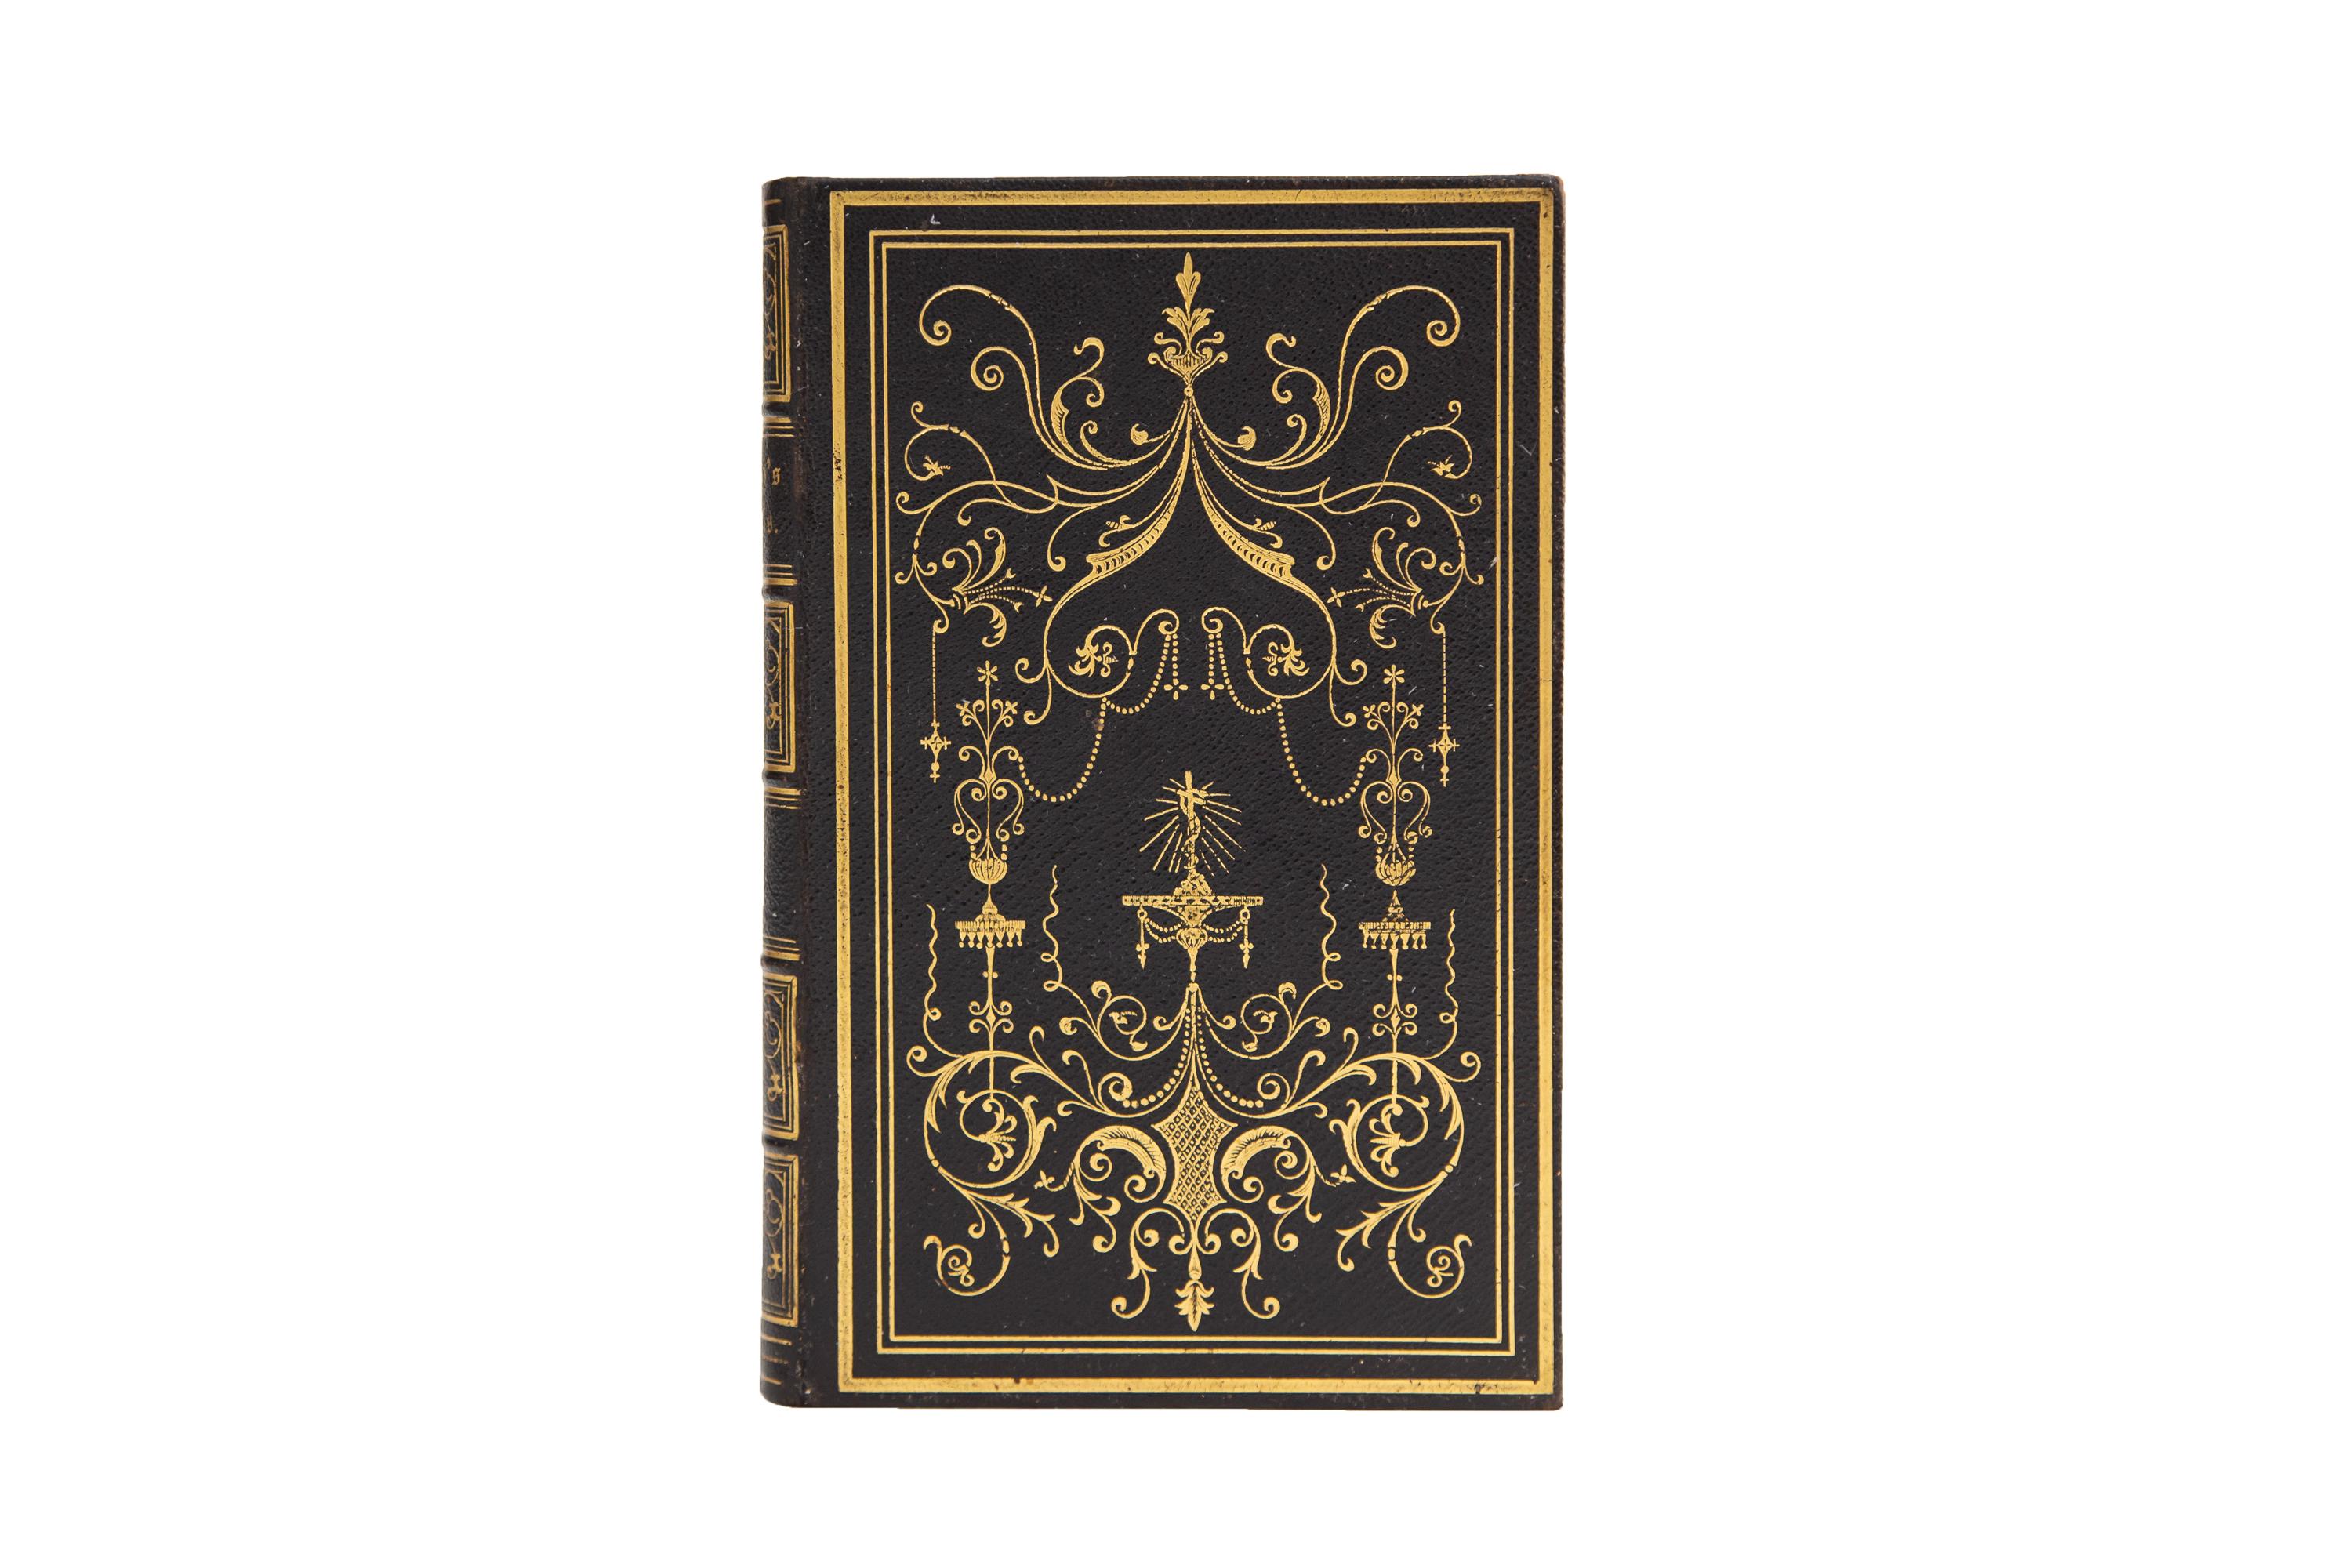 2 Volumes. John Milton, The Poetical Works. Bound in full black morocco with the covers displaying ornate gilt detailing and bordering depicting a scene between two people under a tree surrounded by embellishments. Raised bands with panels